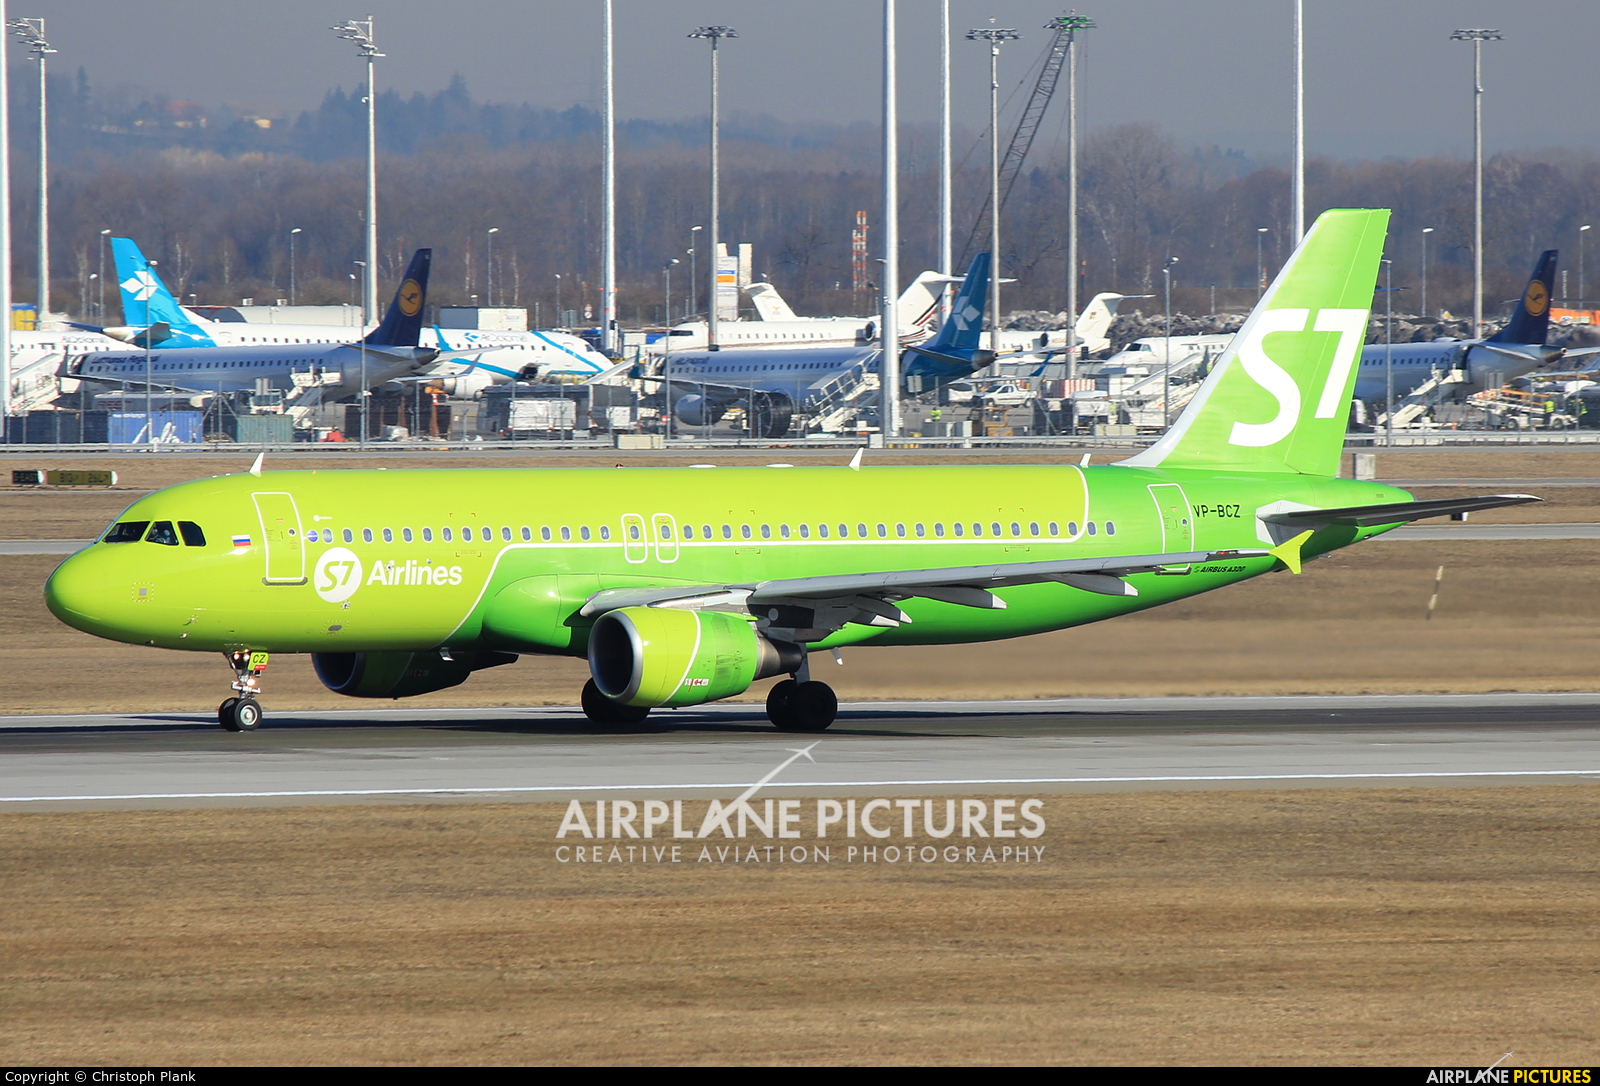 S7 Airlines VP-BCZ aircraft at Munich